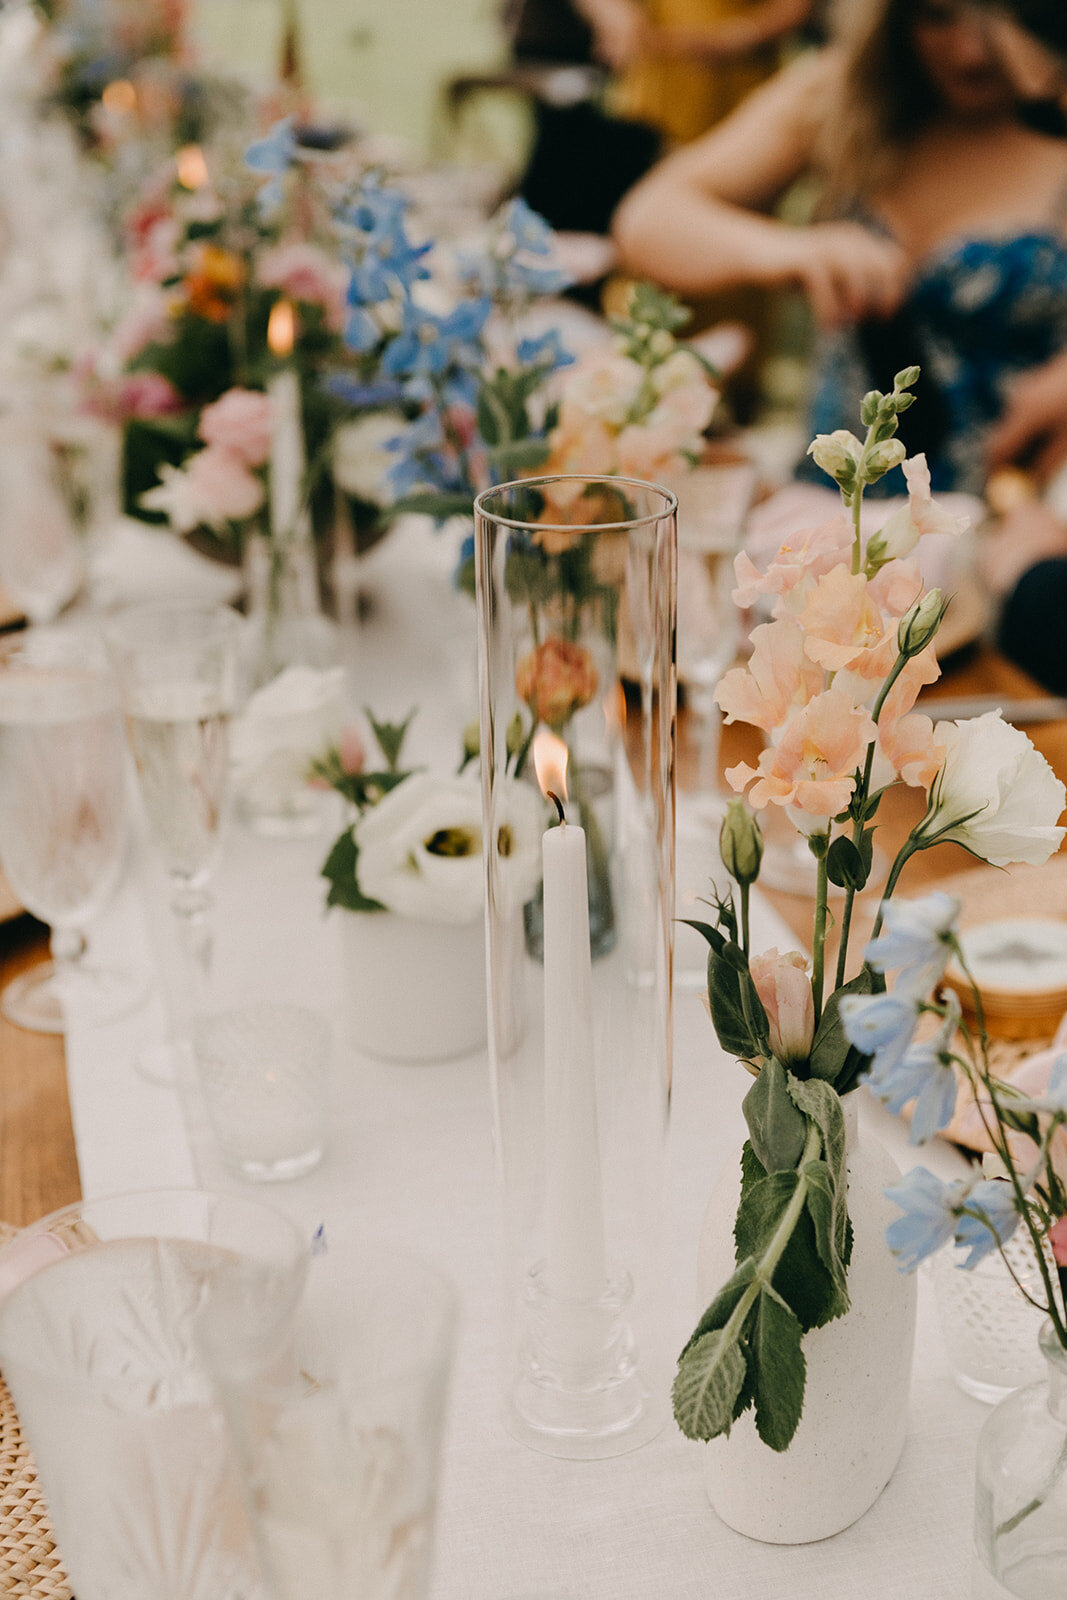 Florals at tablescape at Maine wedding